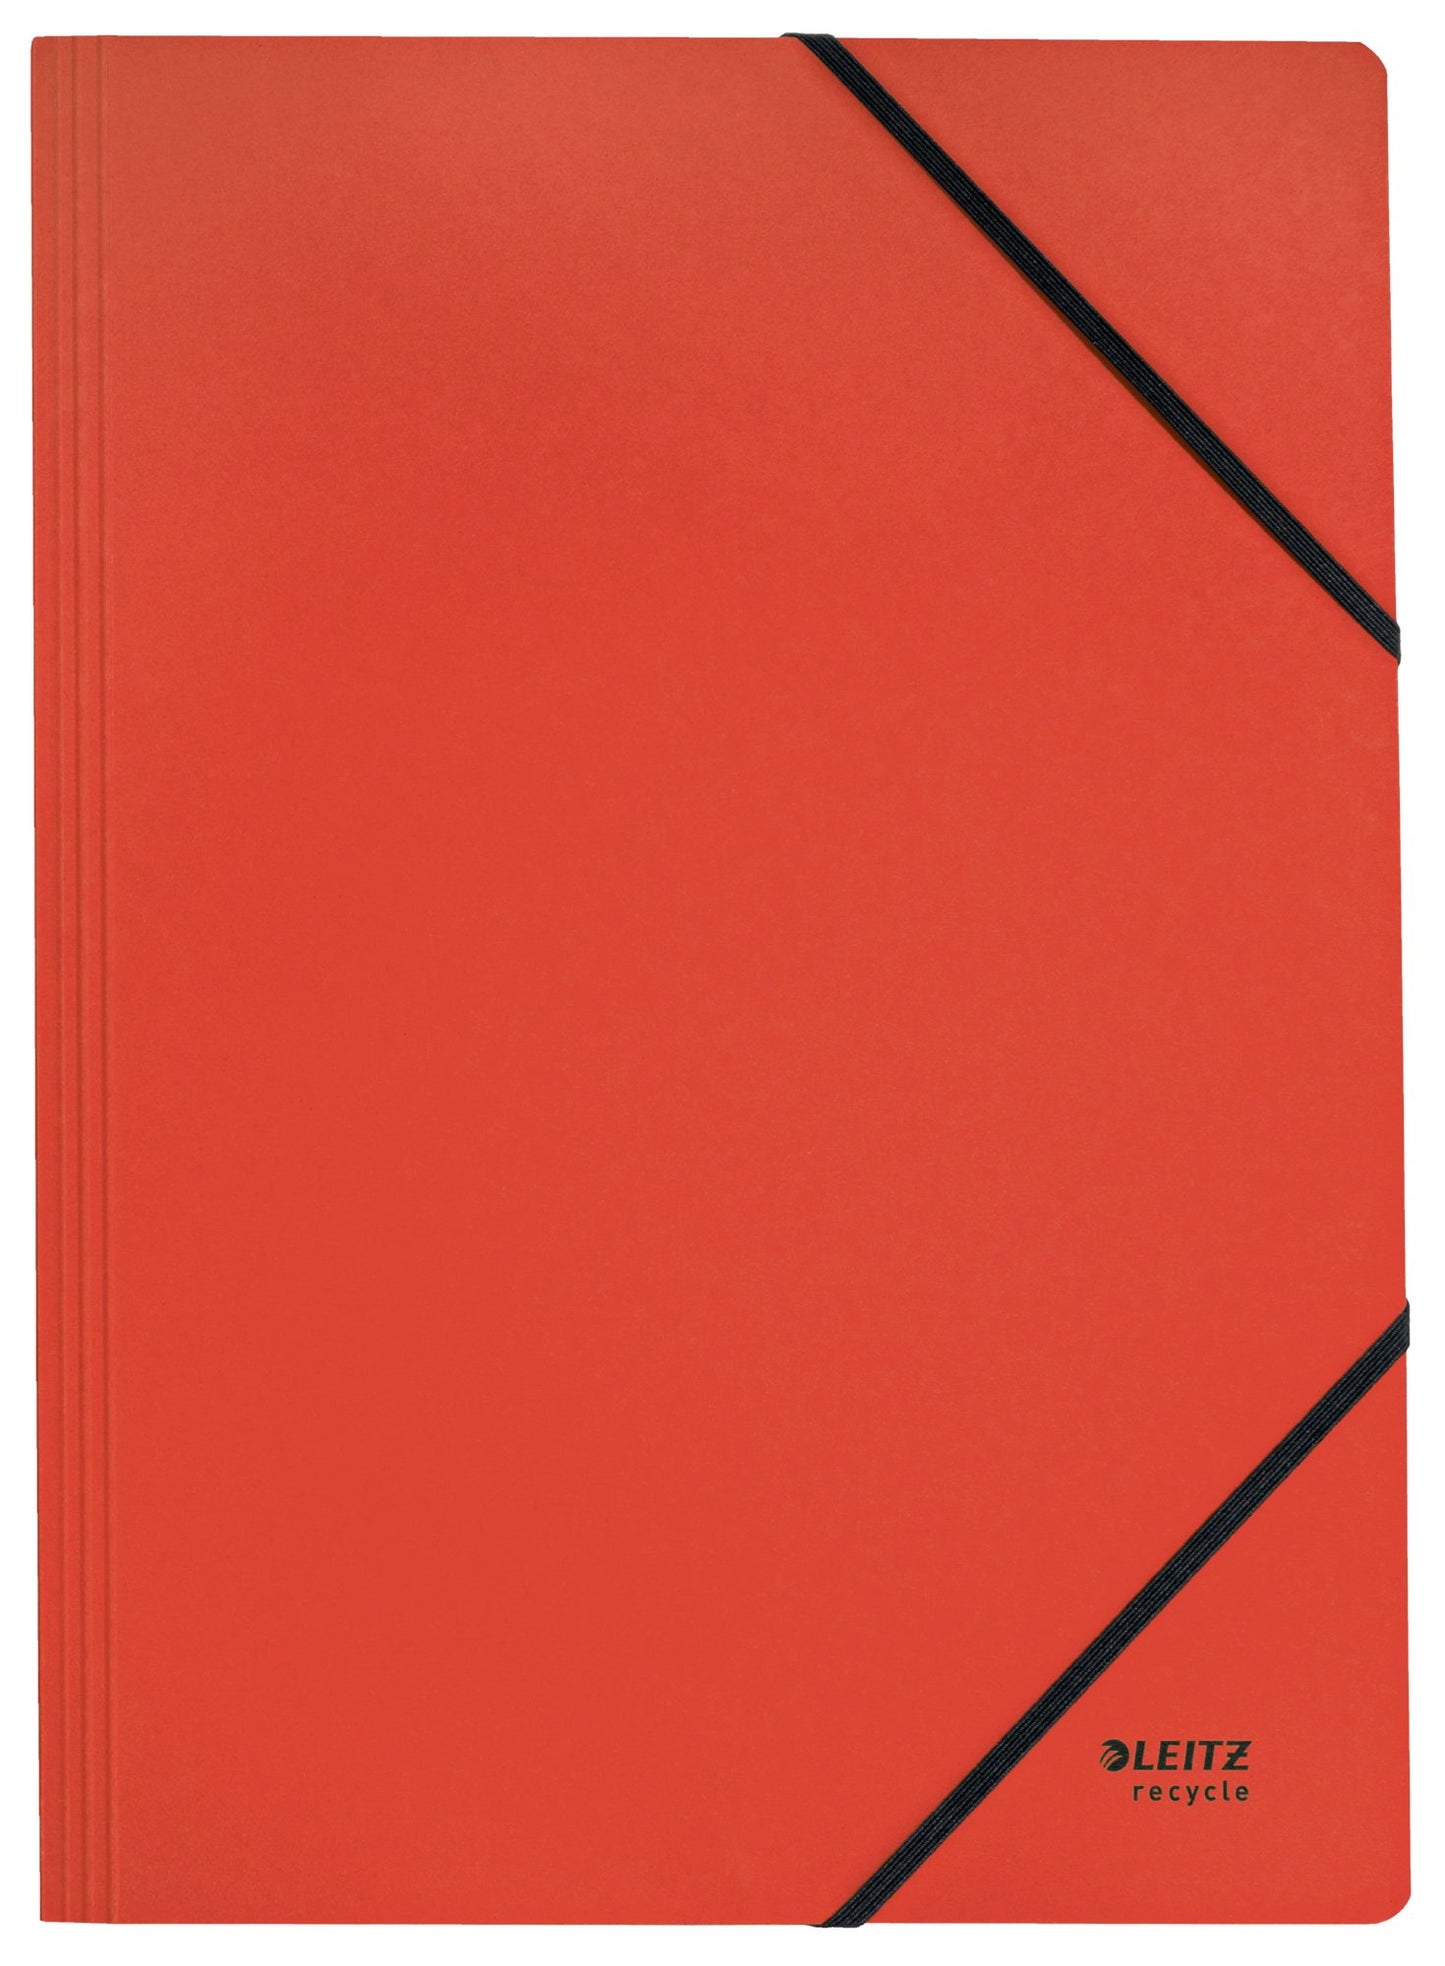 Leitz Recycle Card Folder With Elastic Band Closure A4 Red 39080025 - NWT FM SOLUTIONS - YOUR CATERING WHOLESALER